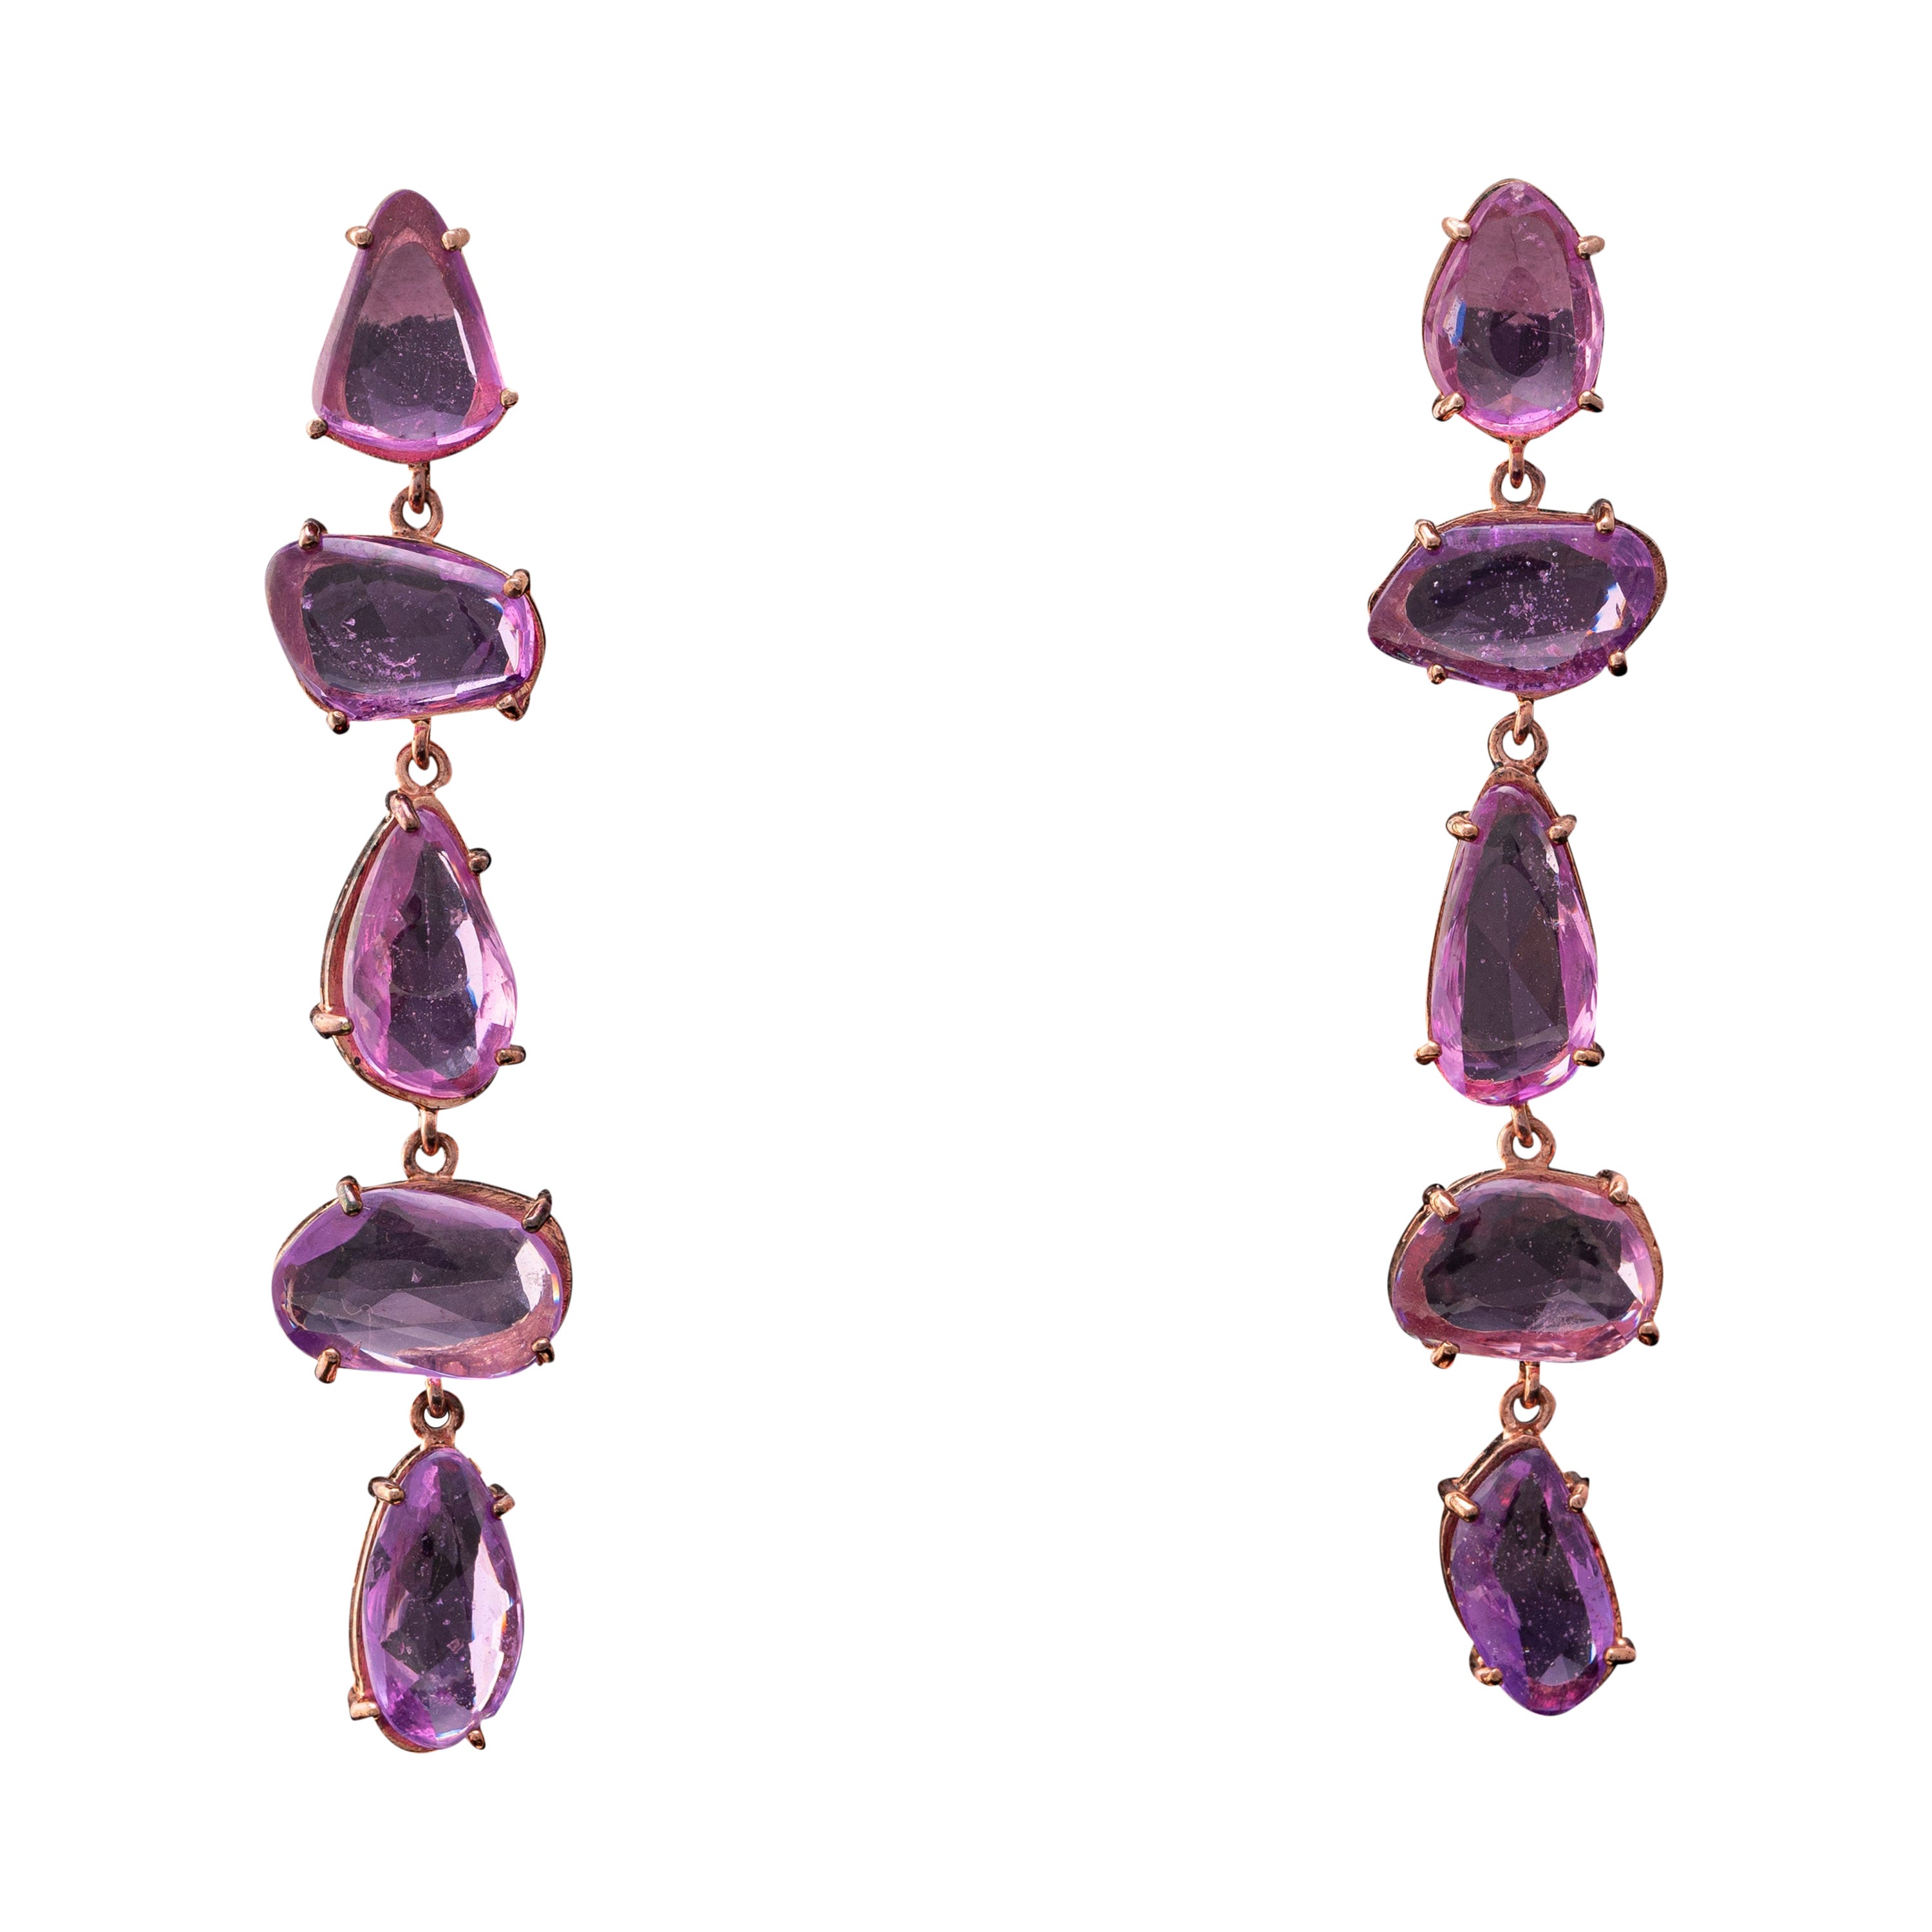 Certified 12 Carat Pink Sapphire Rose Cut Drop Earrings Set in Pink Gold For Sale